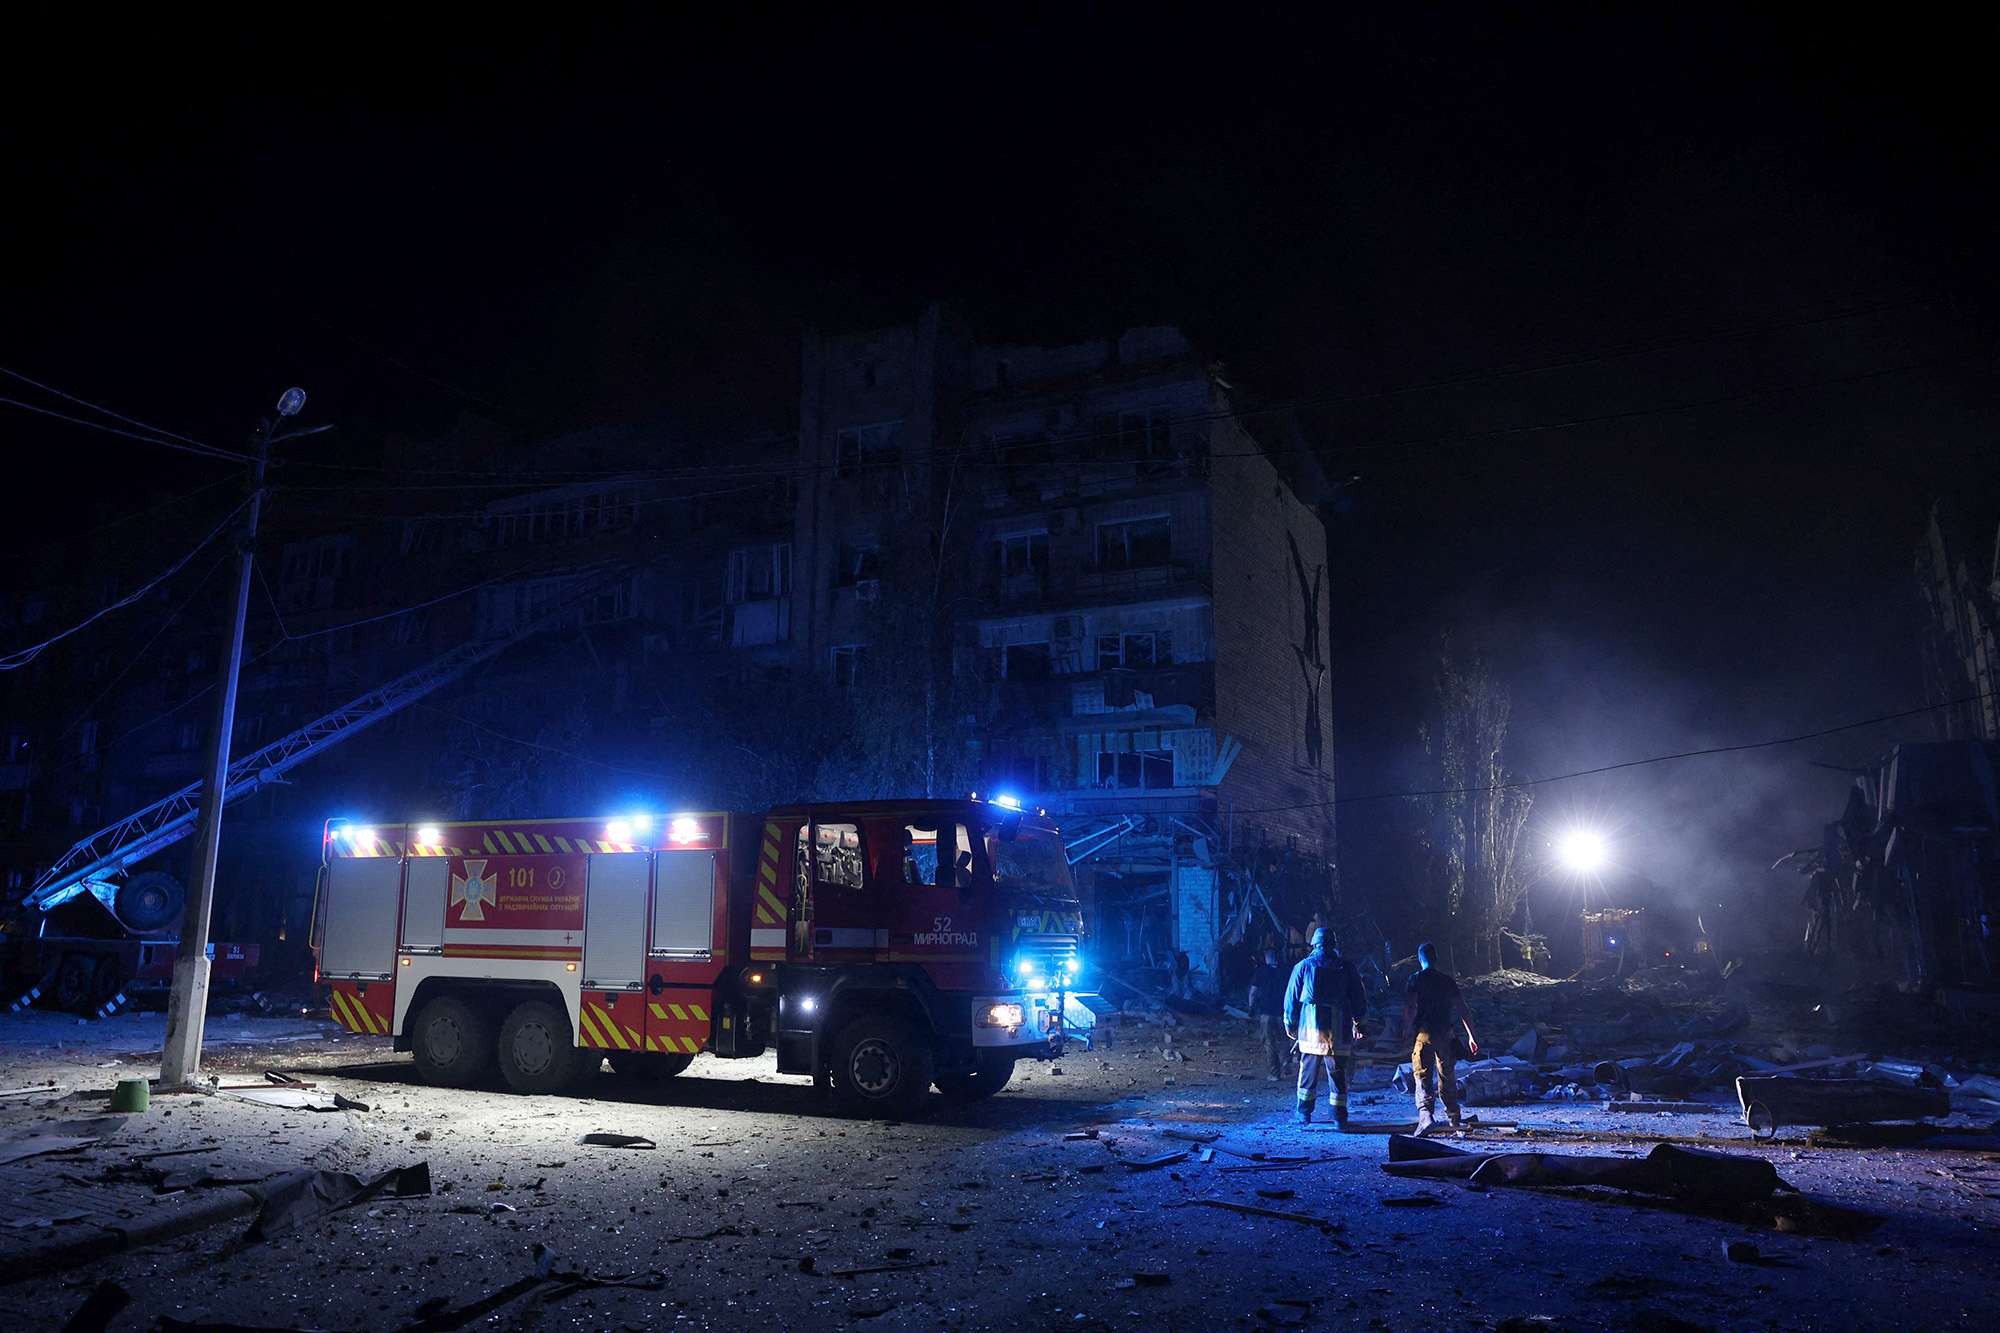 Rescuers are at work near a damaged residential building following Russian missiles strikes in Pokrovsk, Donetsk region, Ukraine, on August 7.